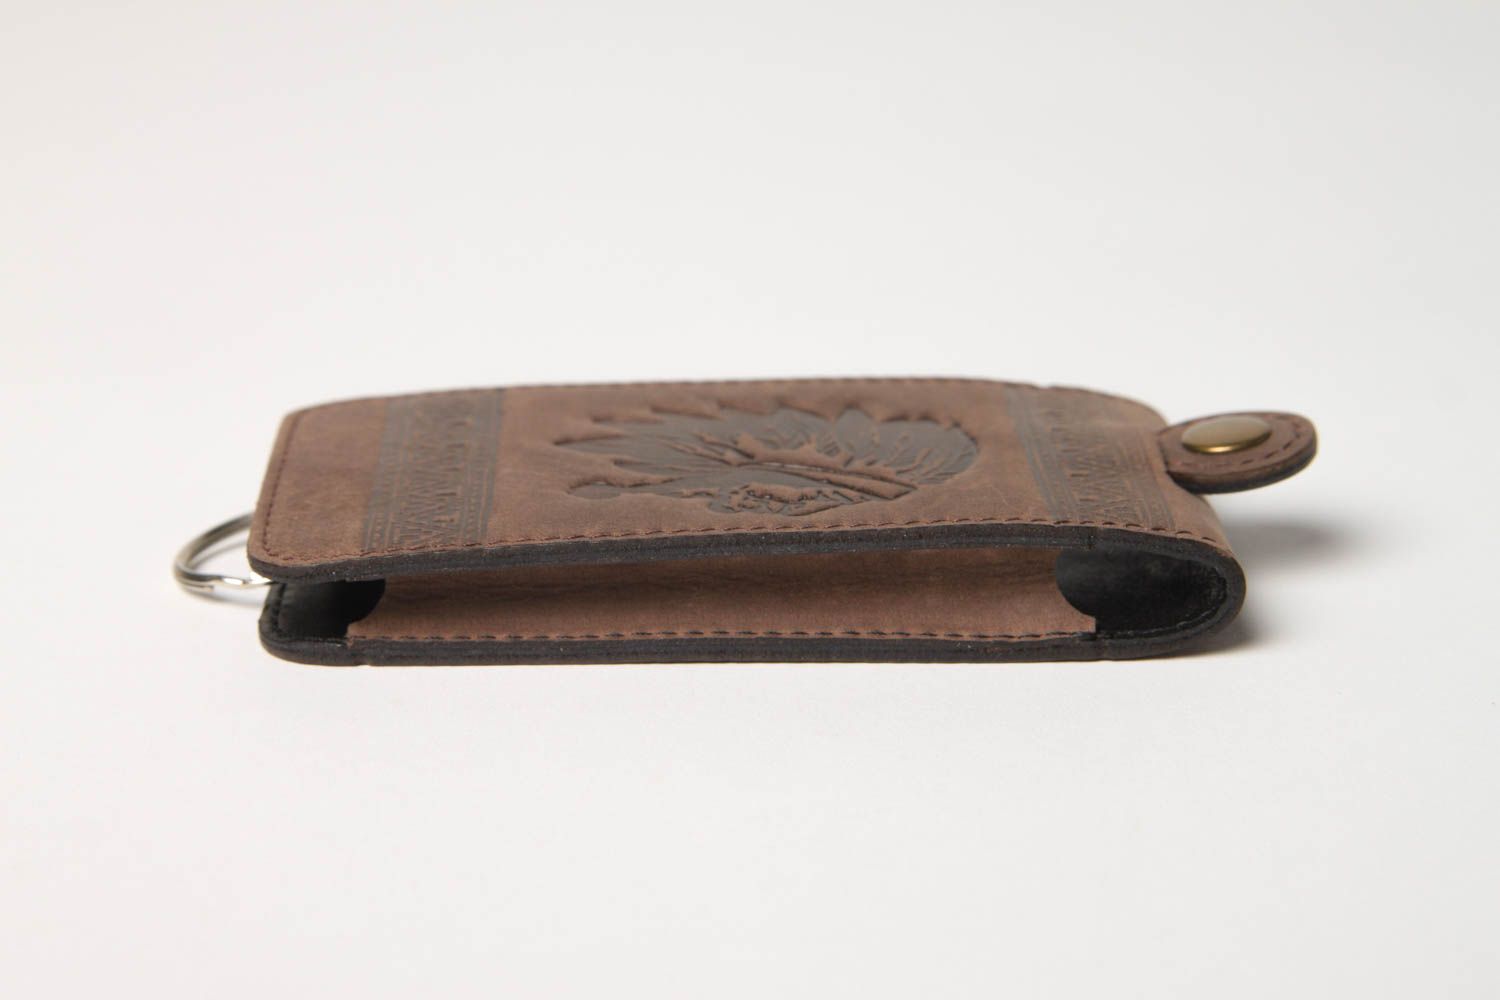 Unusual handmade leather key case handmade accessories best gifts for him photo 4